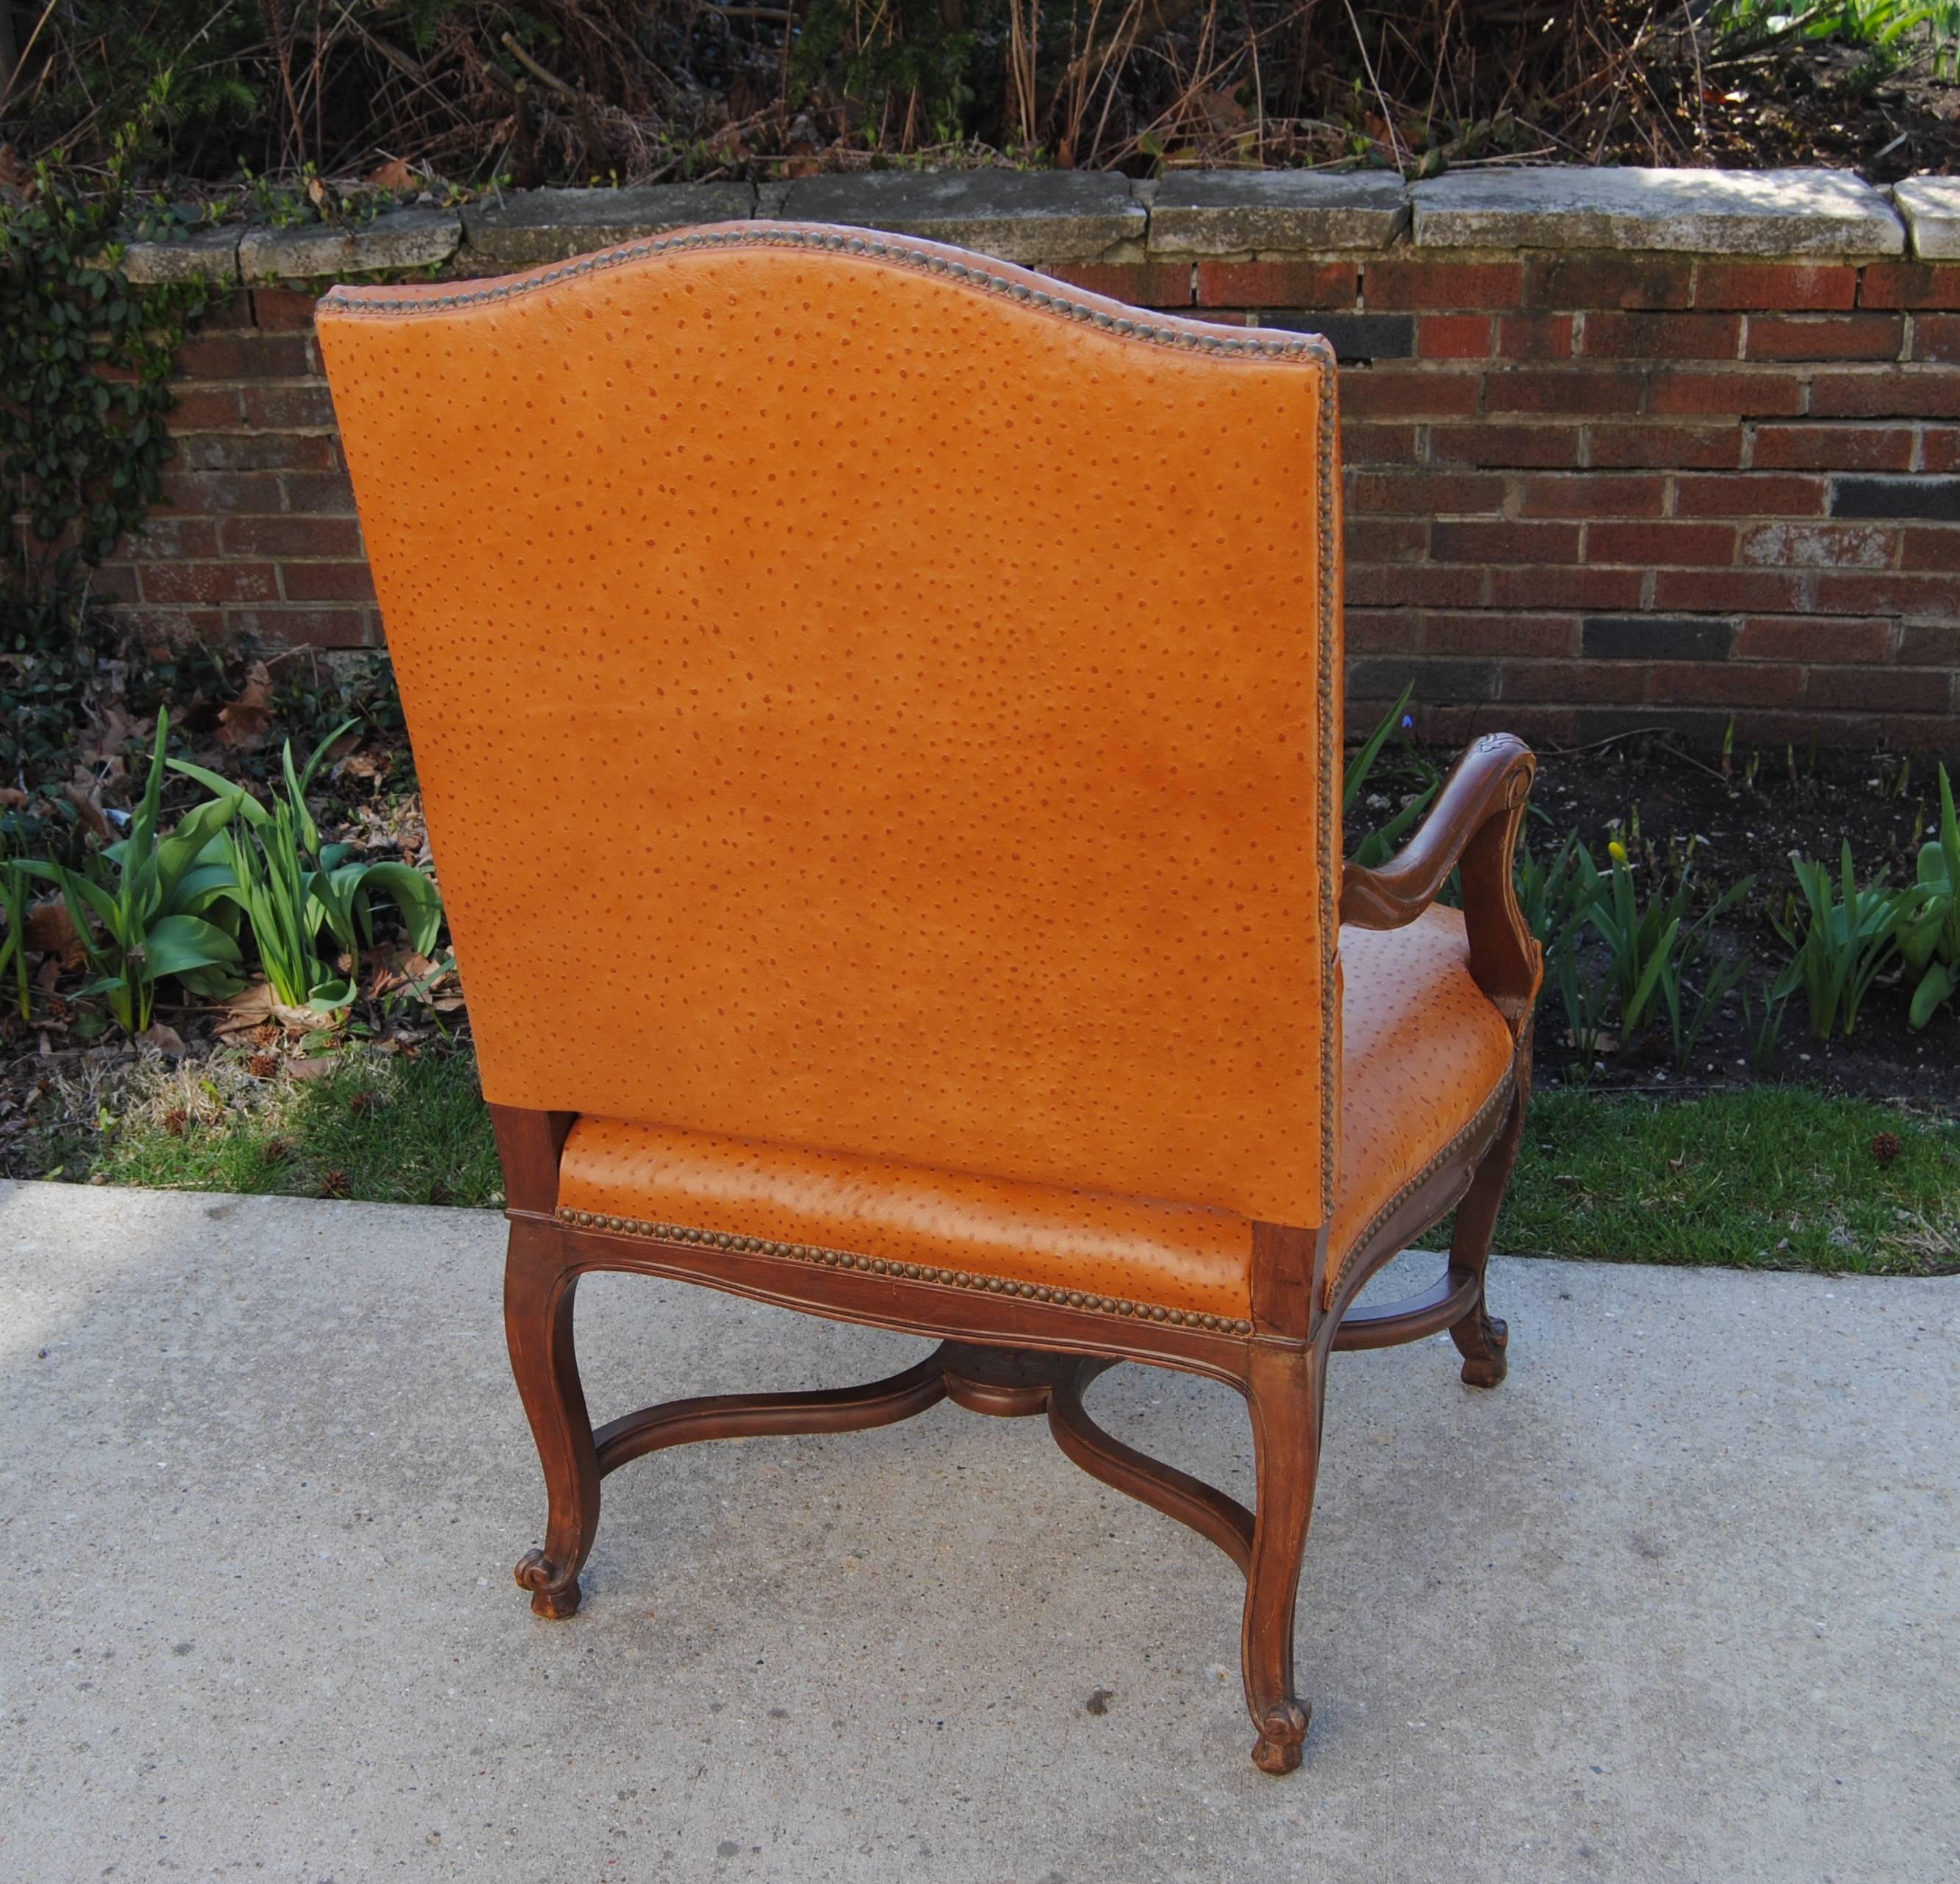 Vintage French fauteuil newly upholstered in Edelman faux ostrich cowhide leather. Chair is finished with vintage gimp and nail head trim. A heavy chair with carved apron and original finish on wood. Early 20th century.